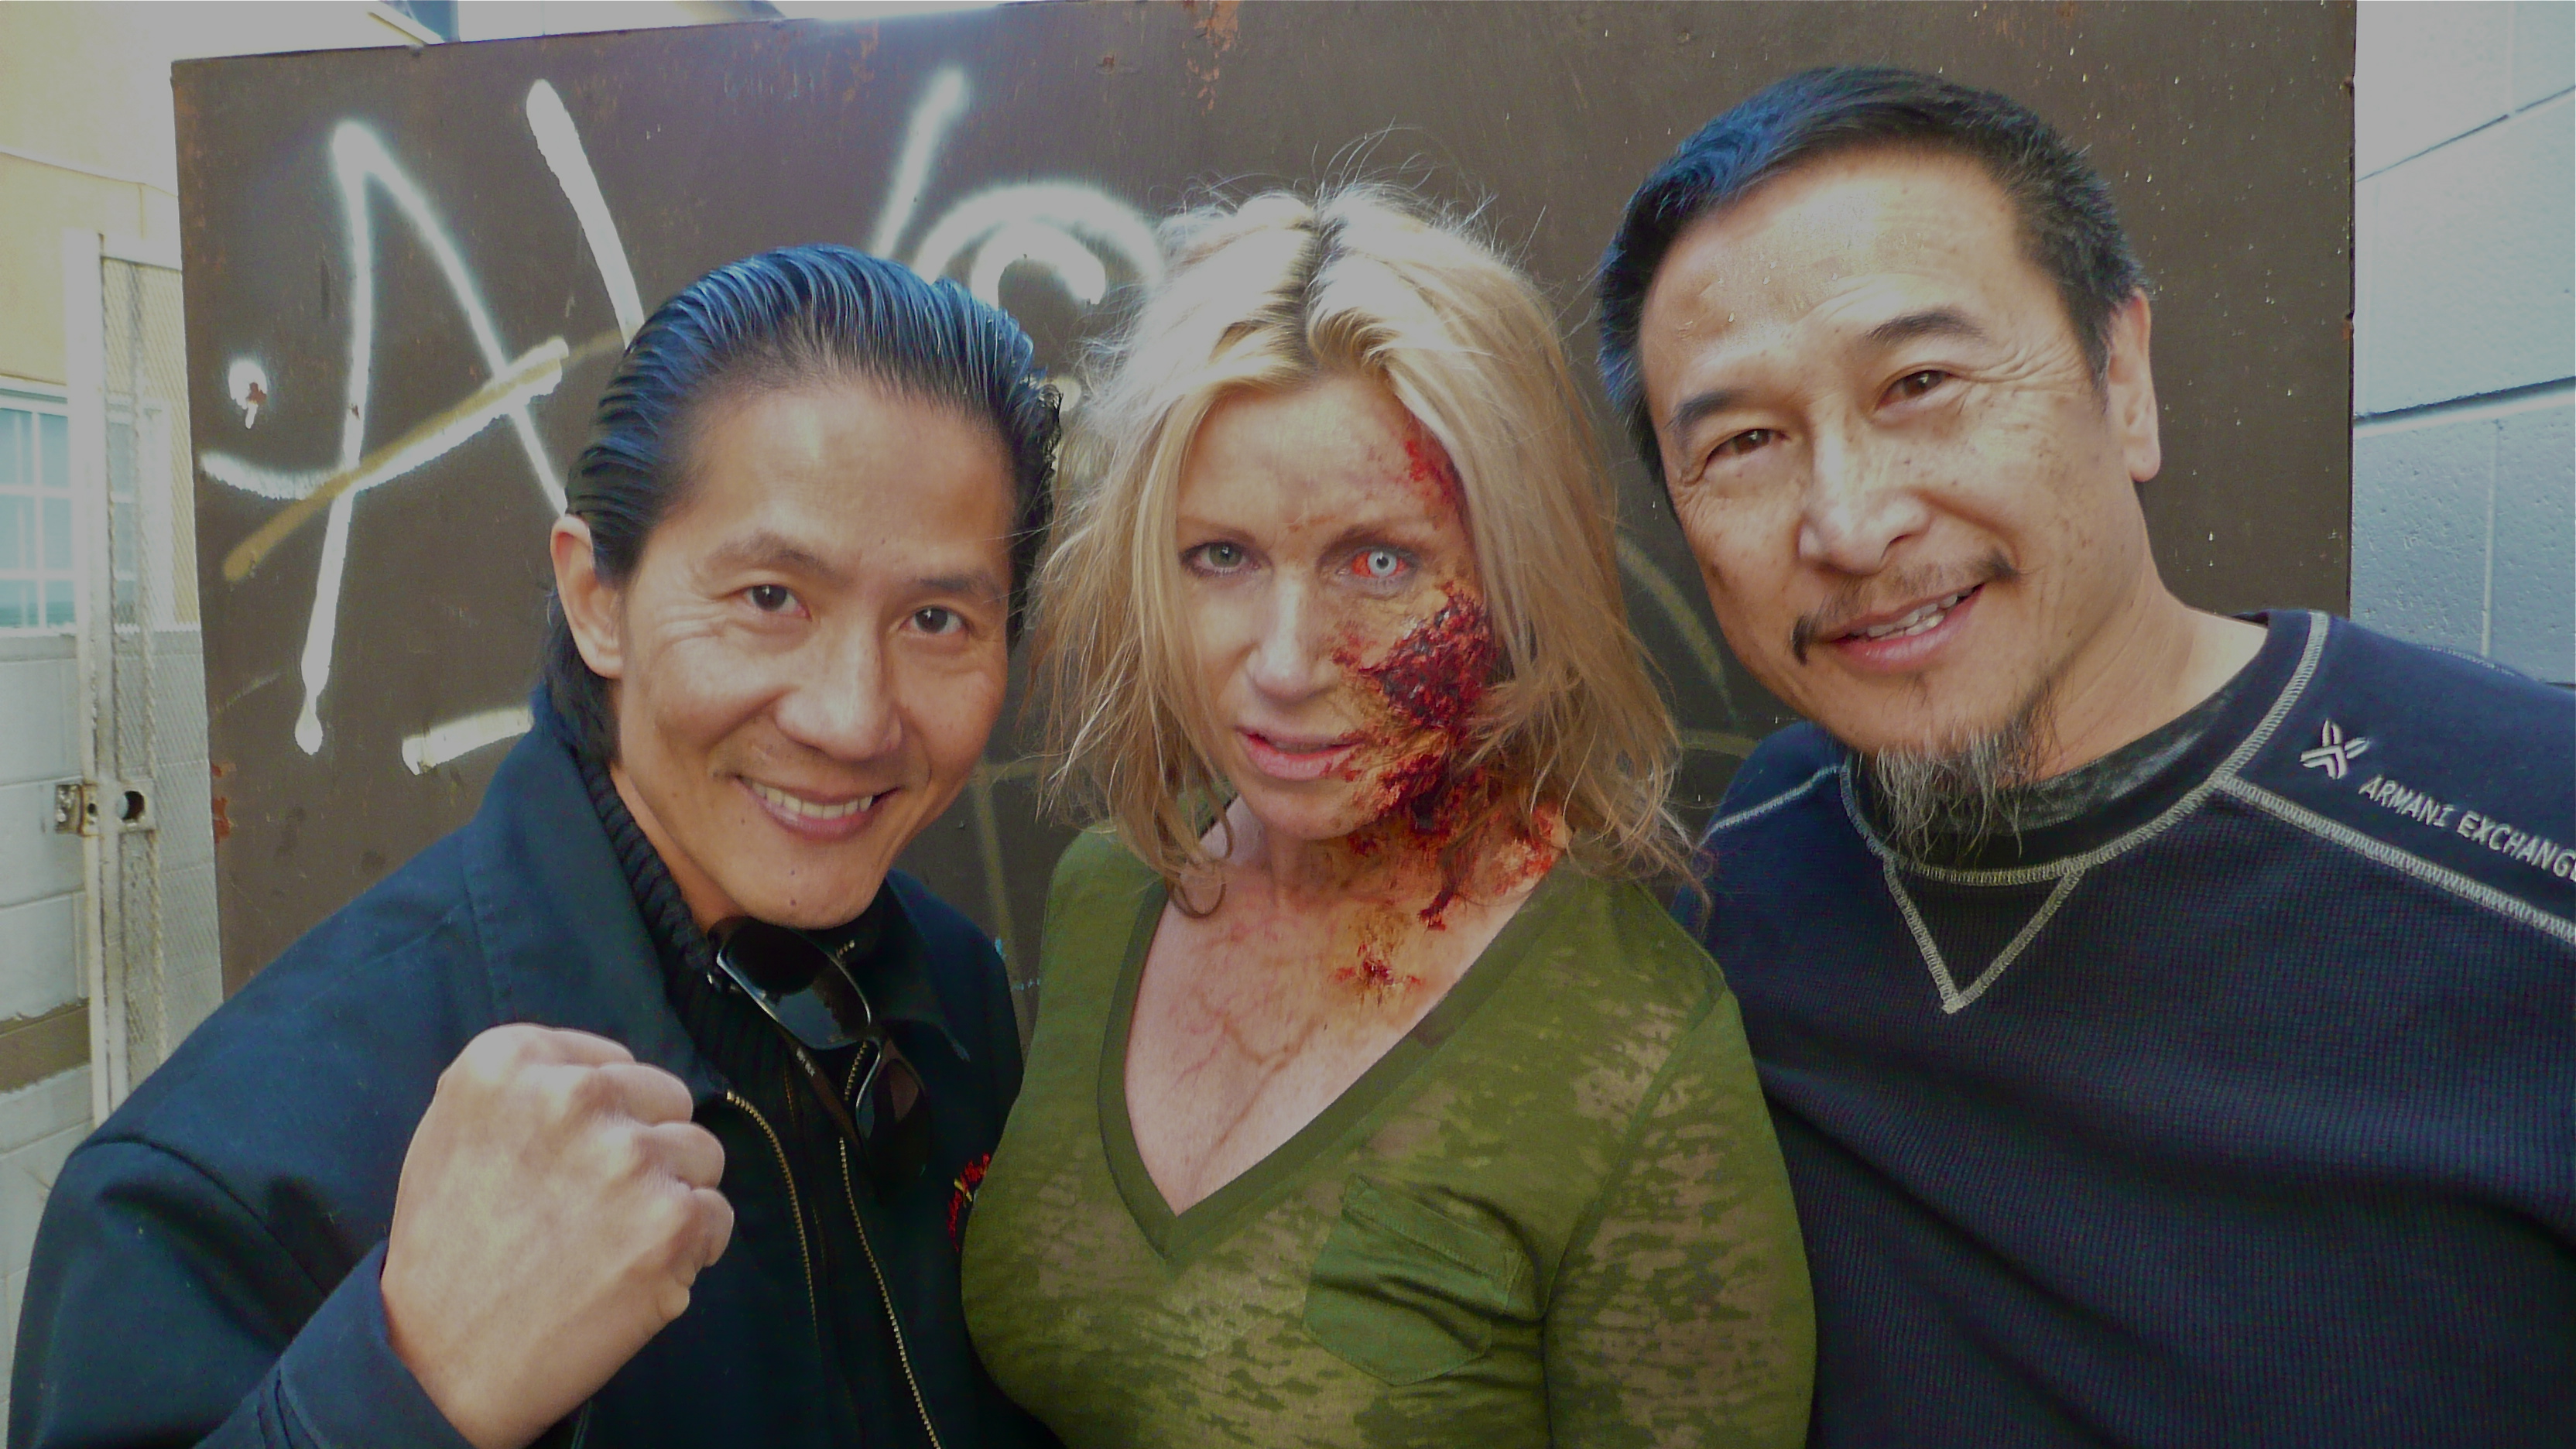 With the amazing Philip Tan and James Lew on Death Valley